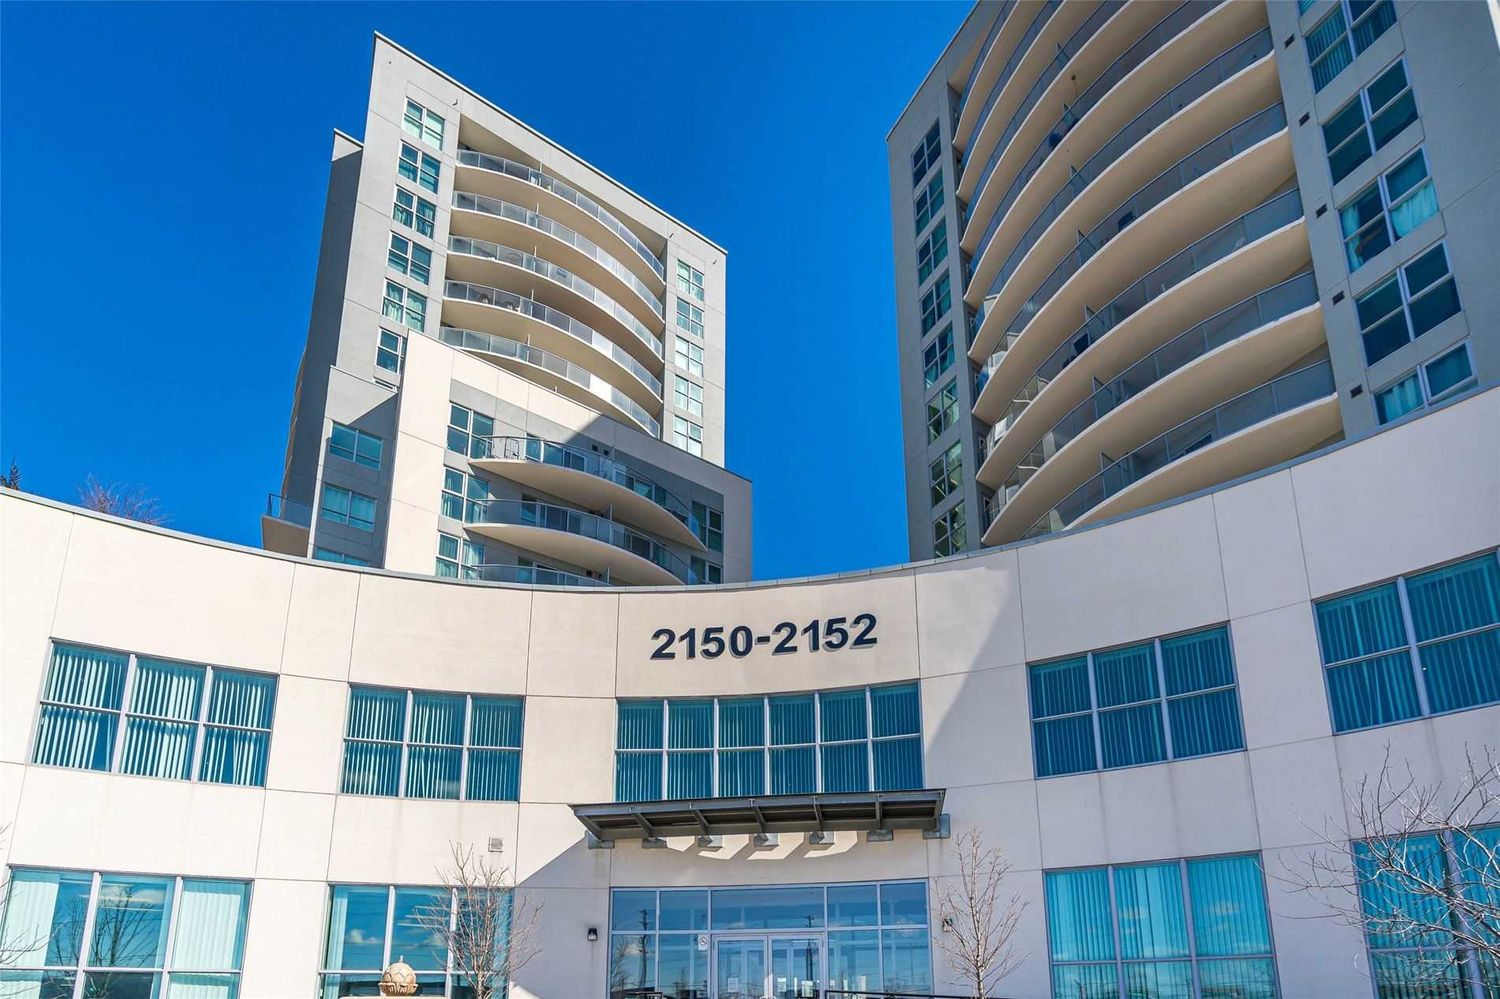 2150-2152 Lawrence Avenue E. 2150 Condos Phase 3 is located in  Scarborough, Toronto - image #2 of 2